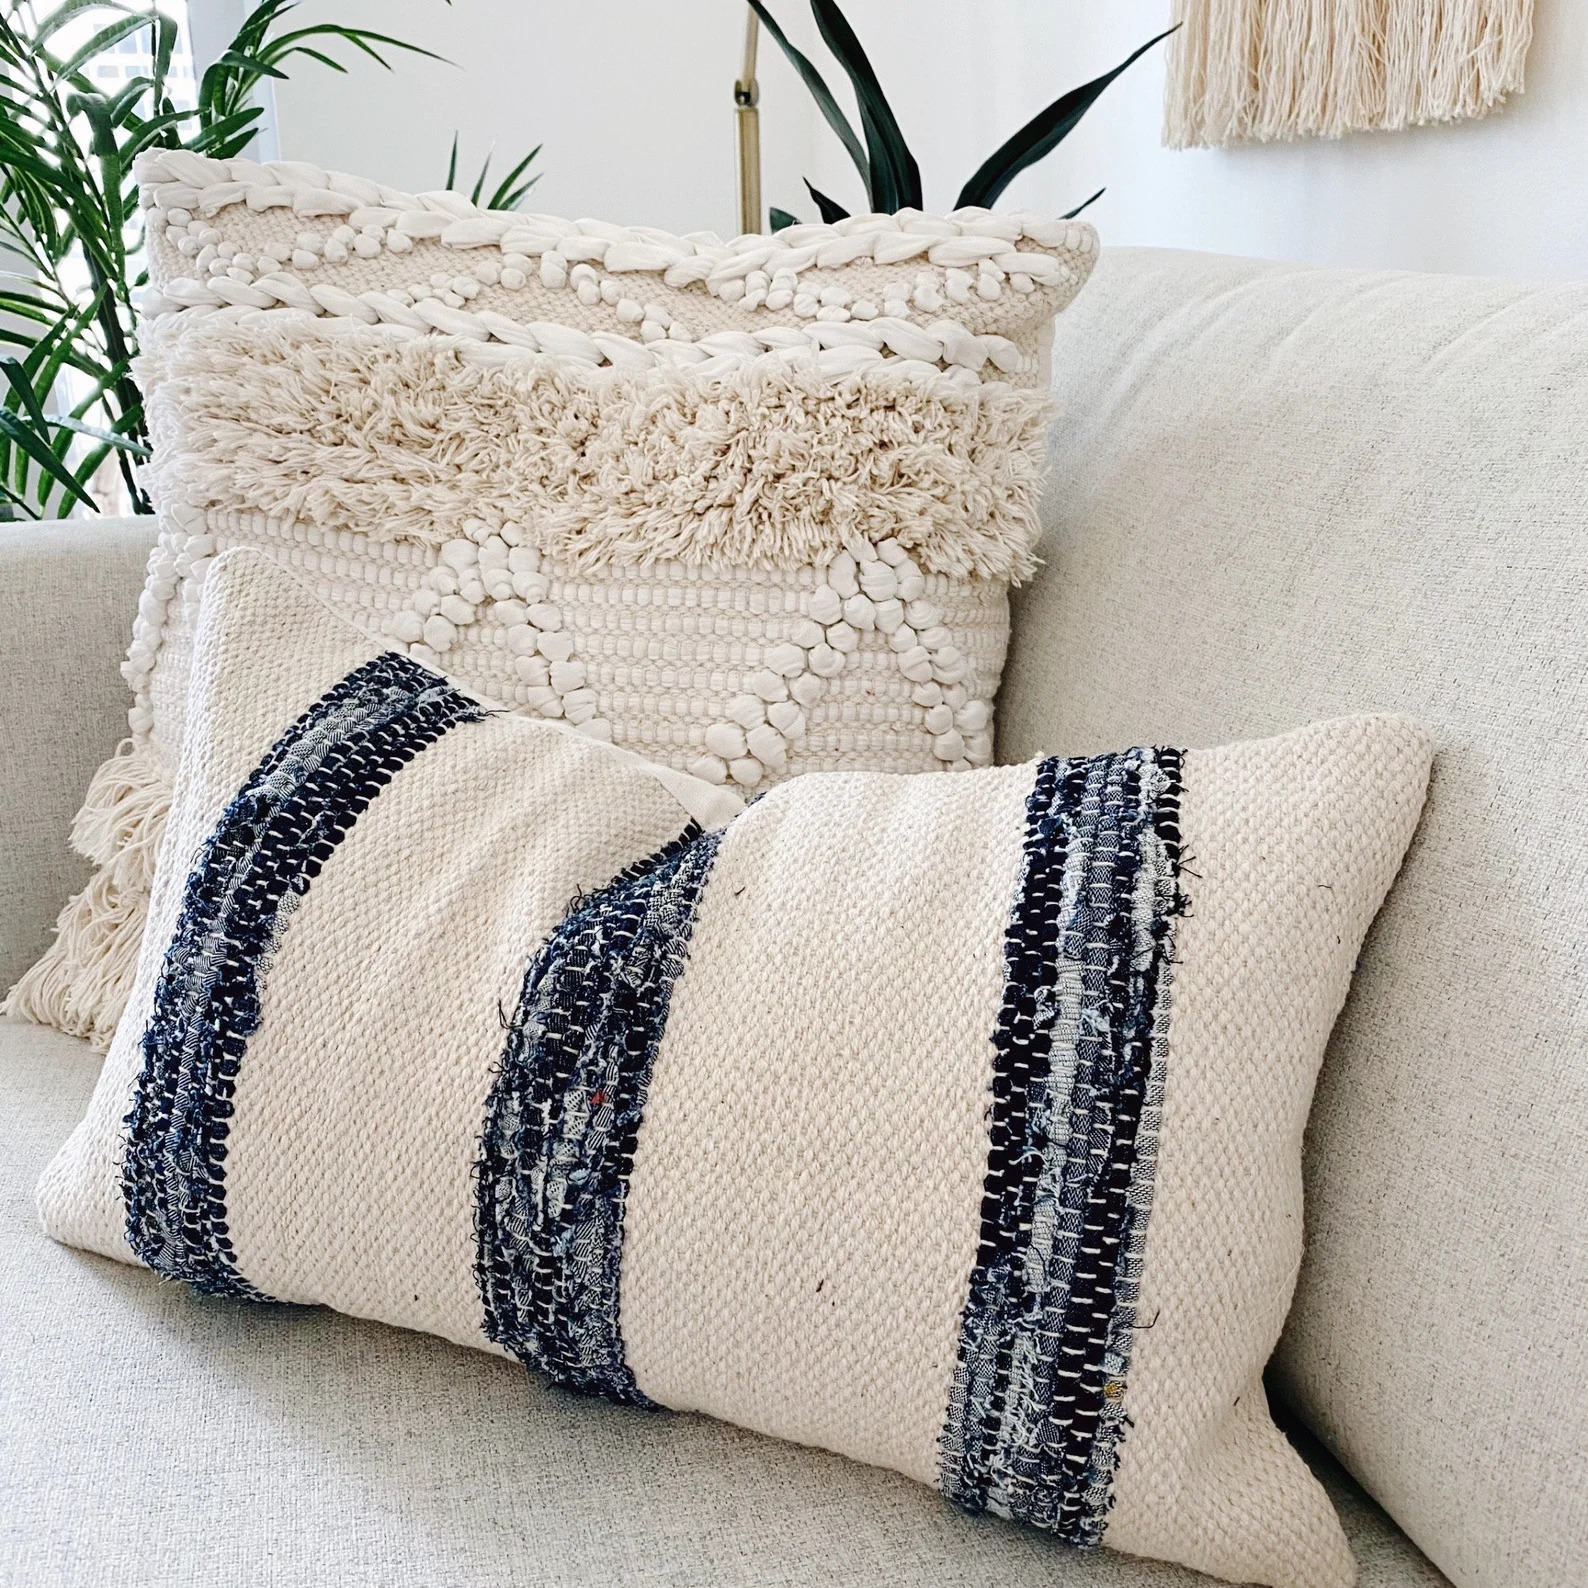 18 Fantastic Coastal Pillow Cover Designs That Will Refresh Your Beach Home